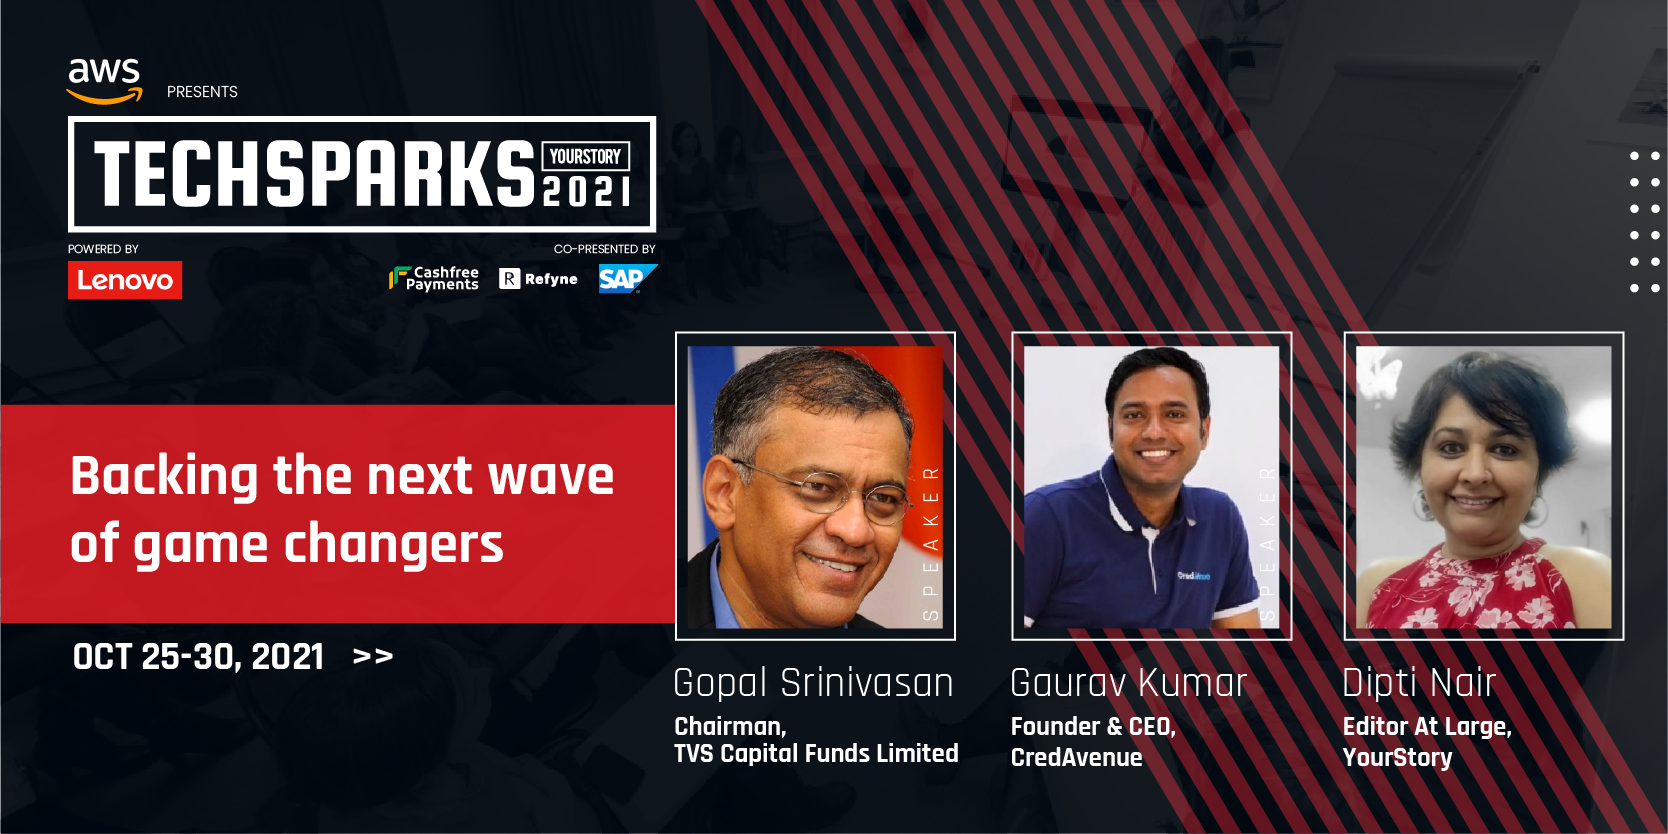 What is the strength of a startup? TVS Capital Funds Gopal Srinivasan and CredAvenue's Gaurav Kumar discuss